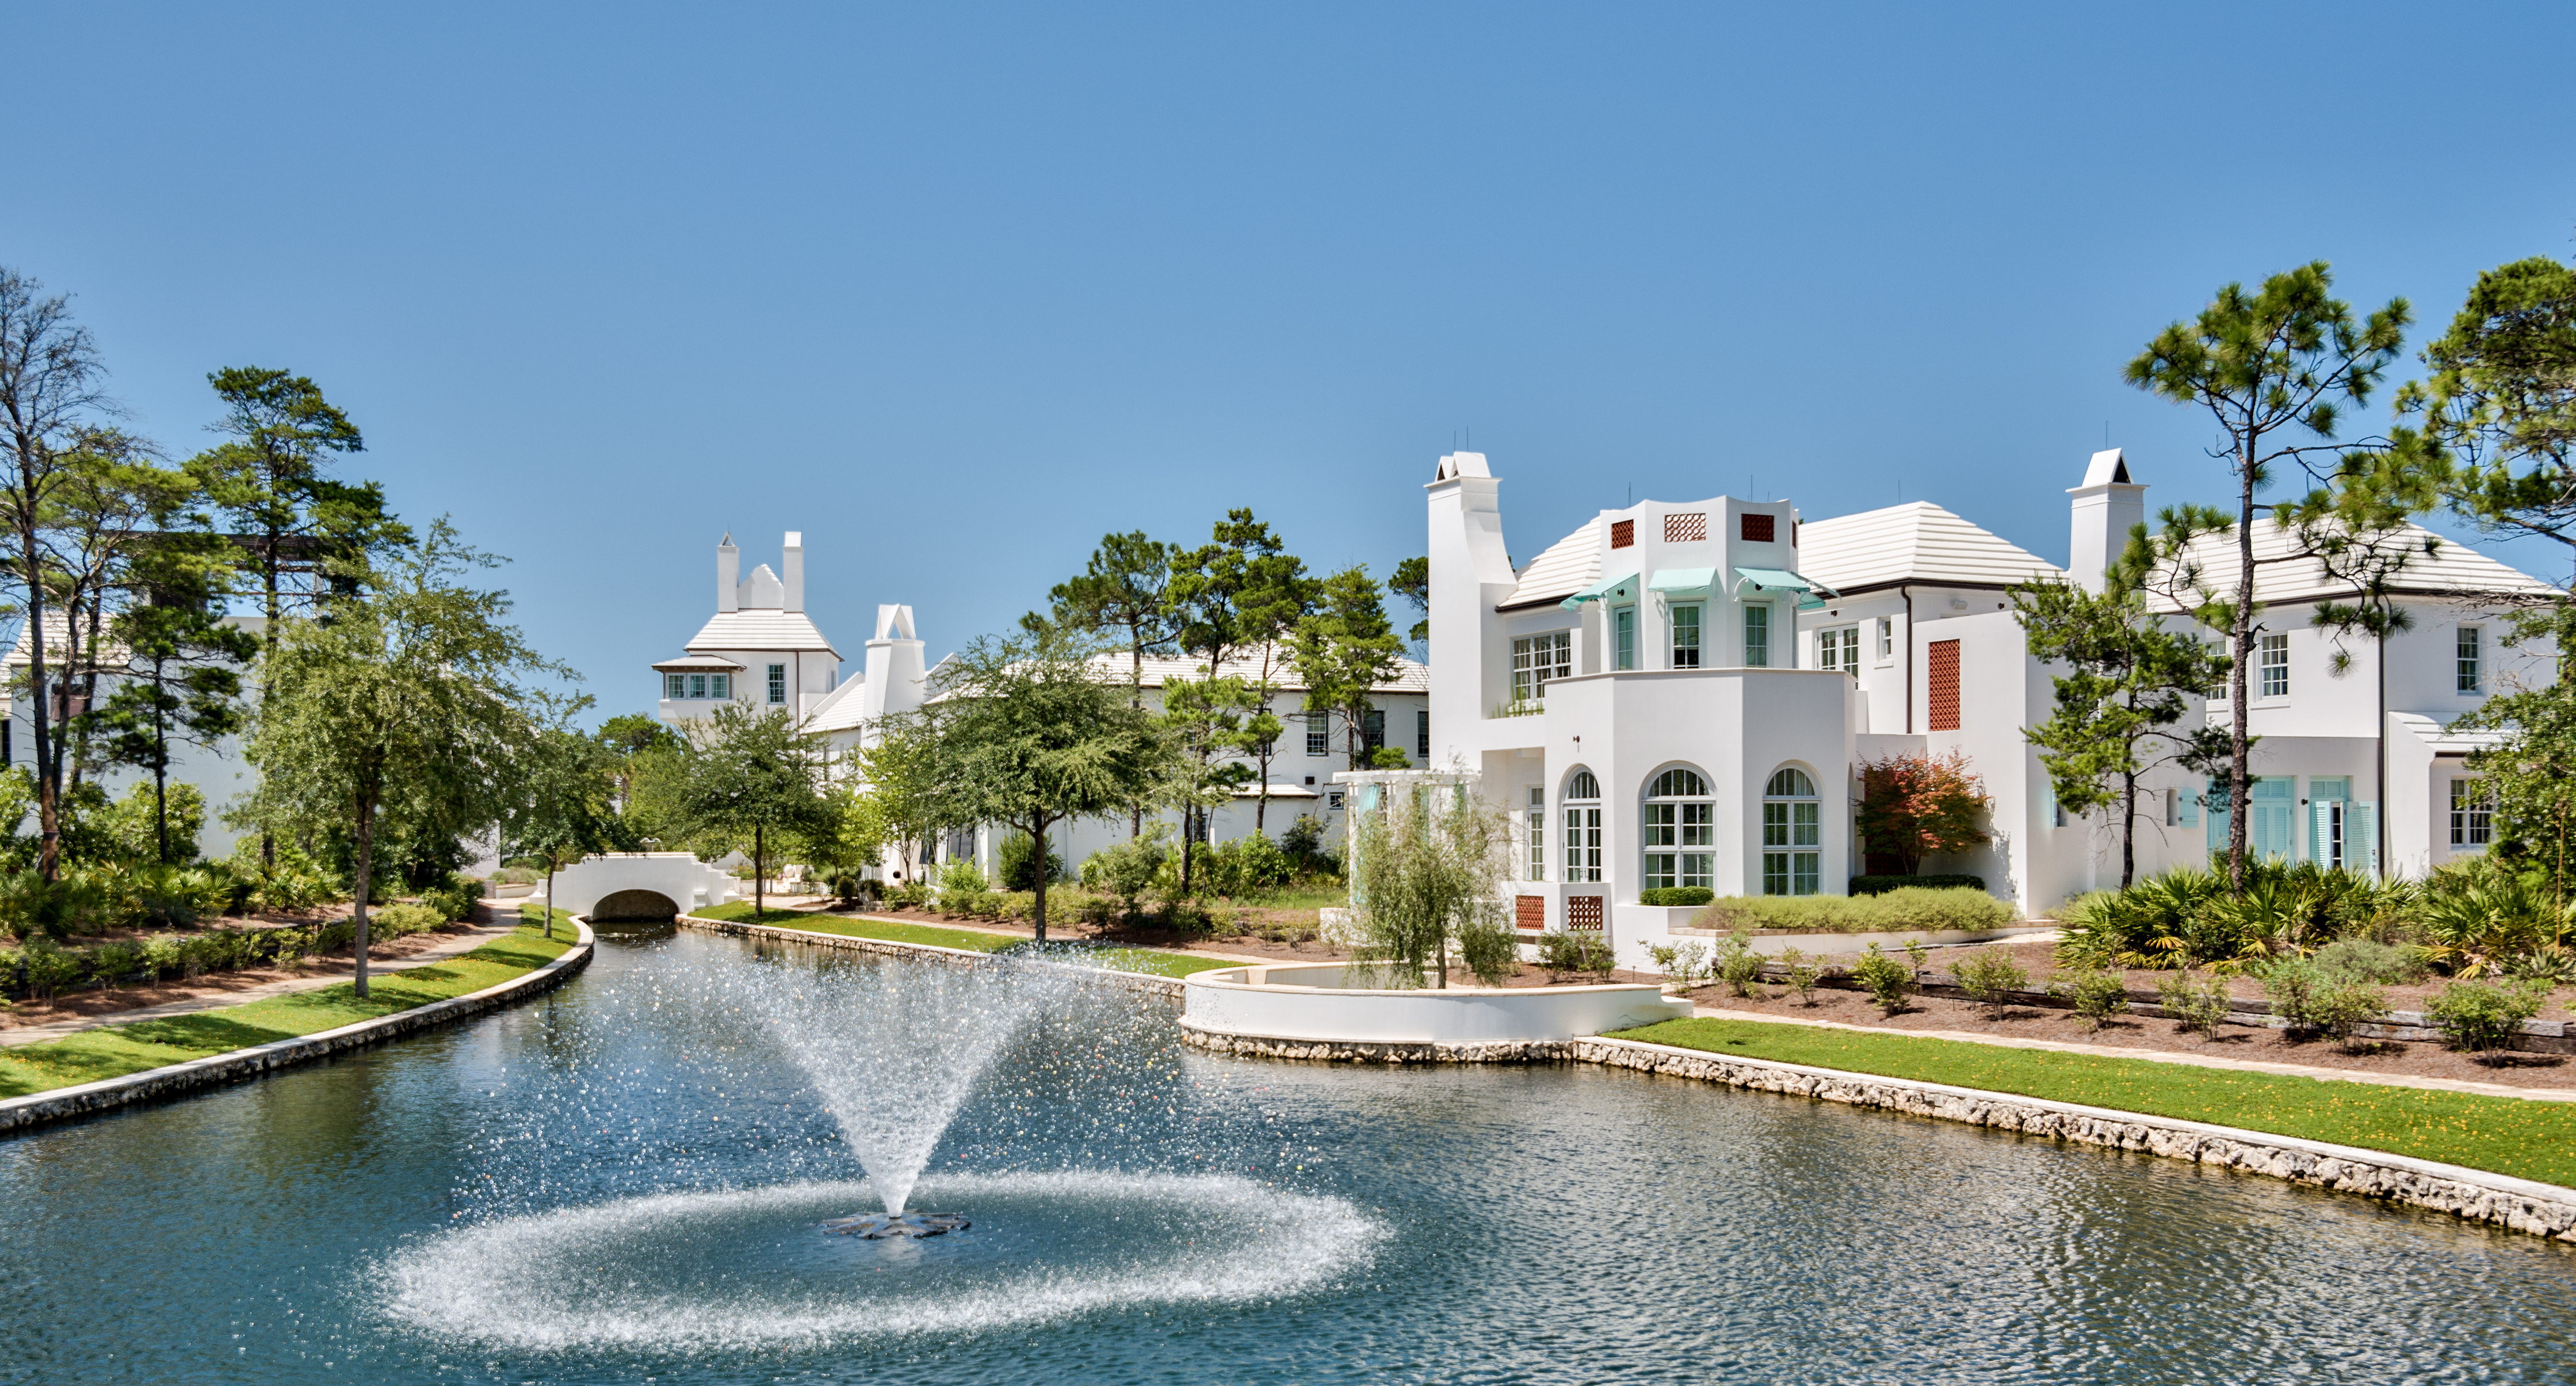 A flowing fountain atop a residential lake with Alys Beach homes in the background